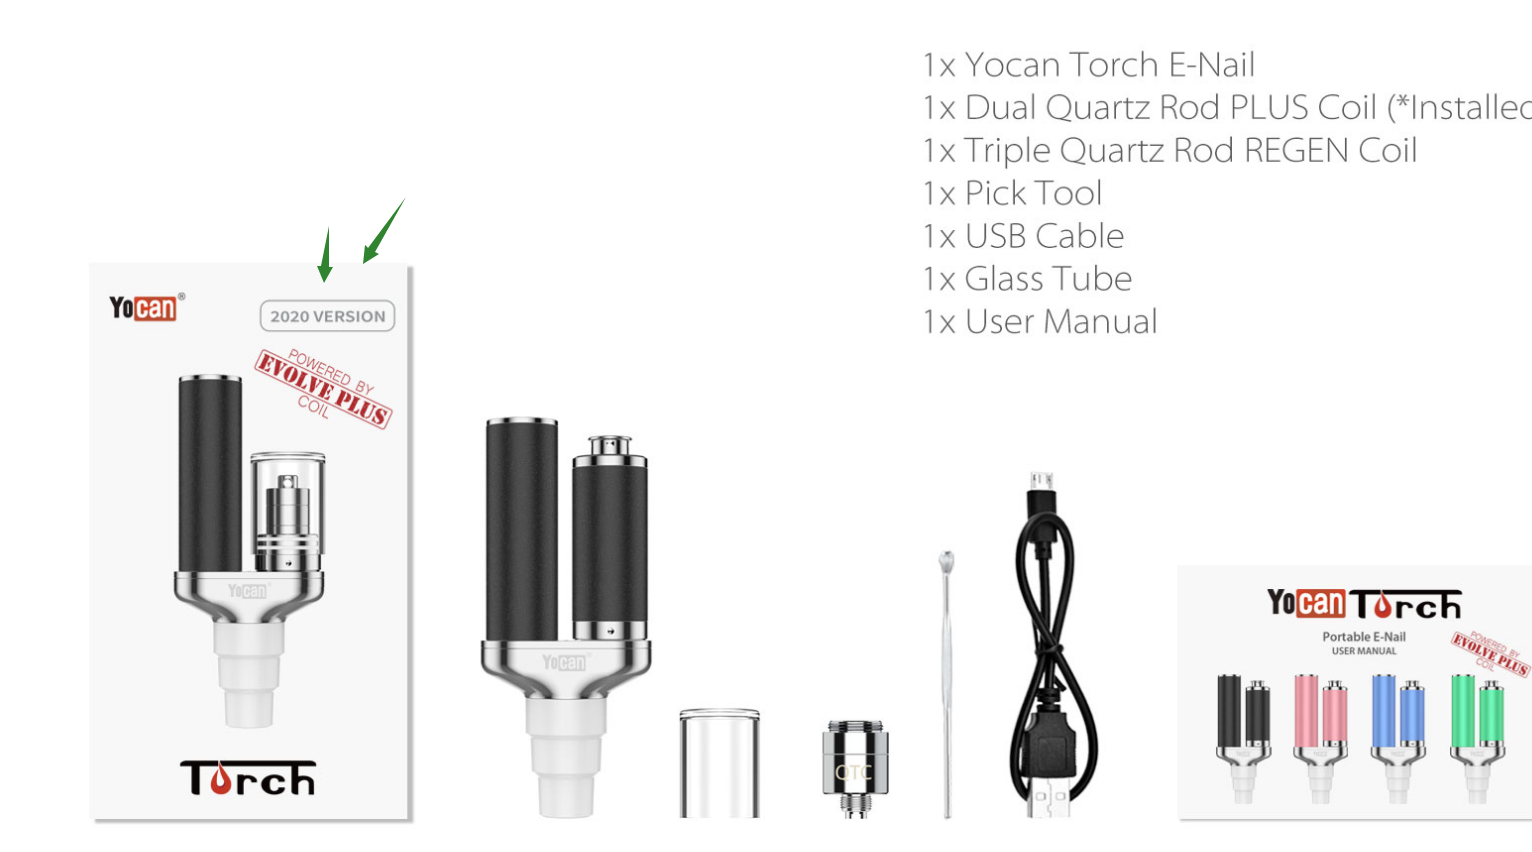 the package of the Yocan Torch.png